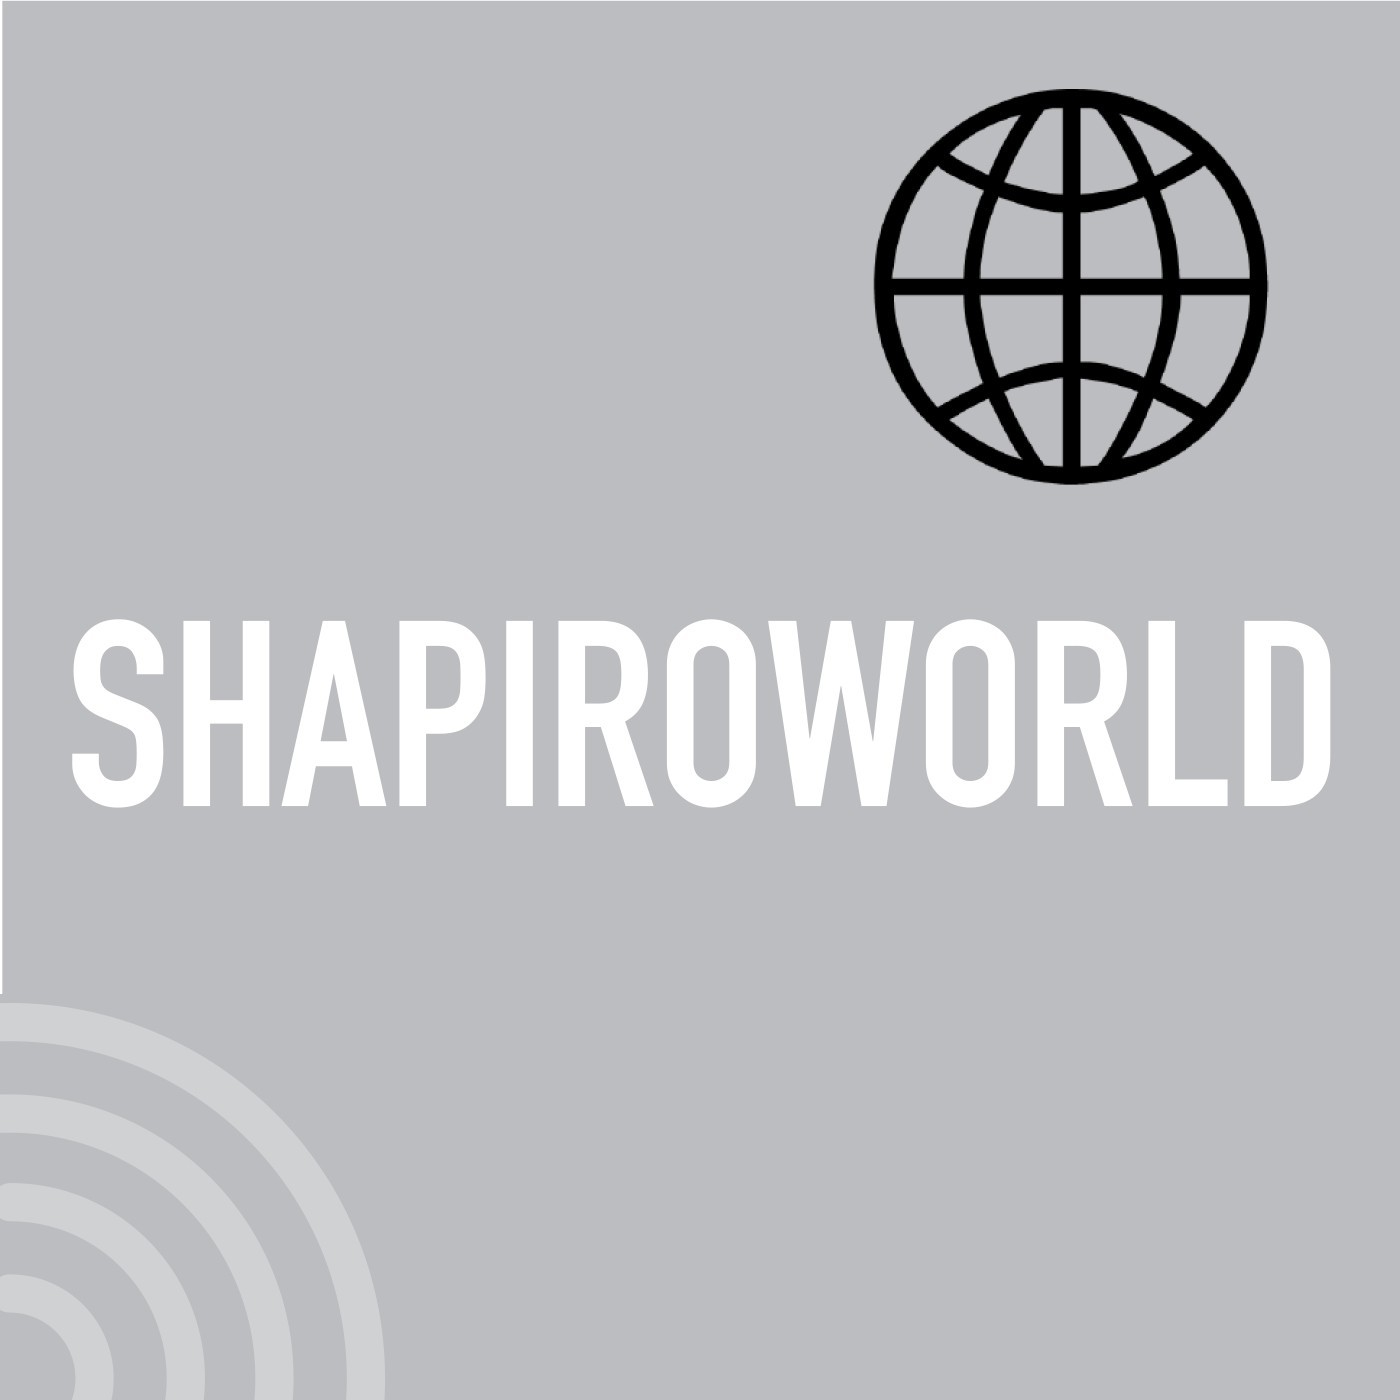 Shapiroworld by Strictly Business